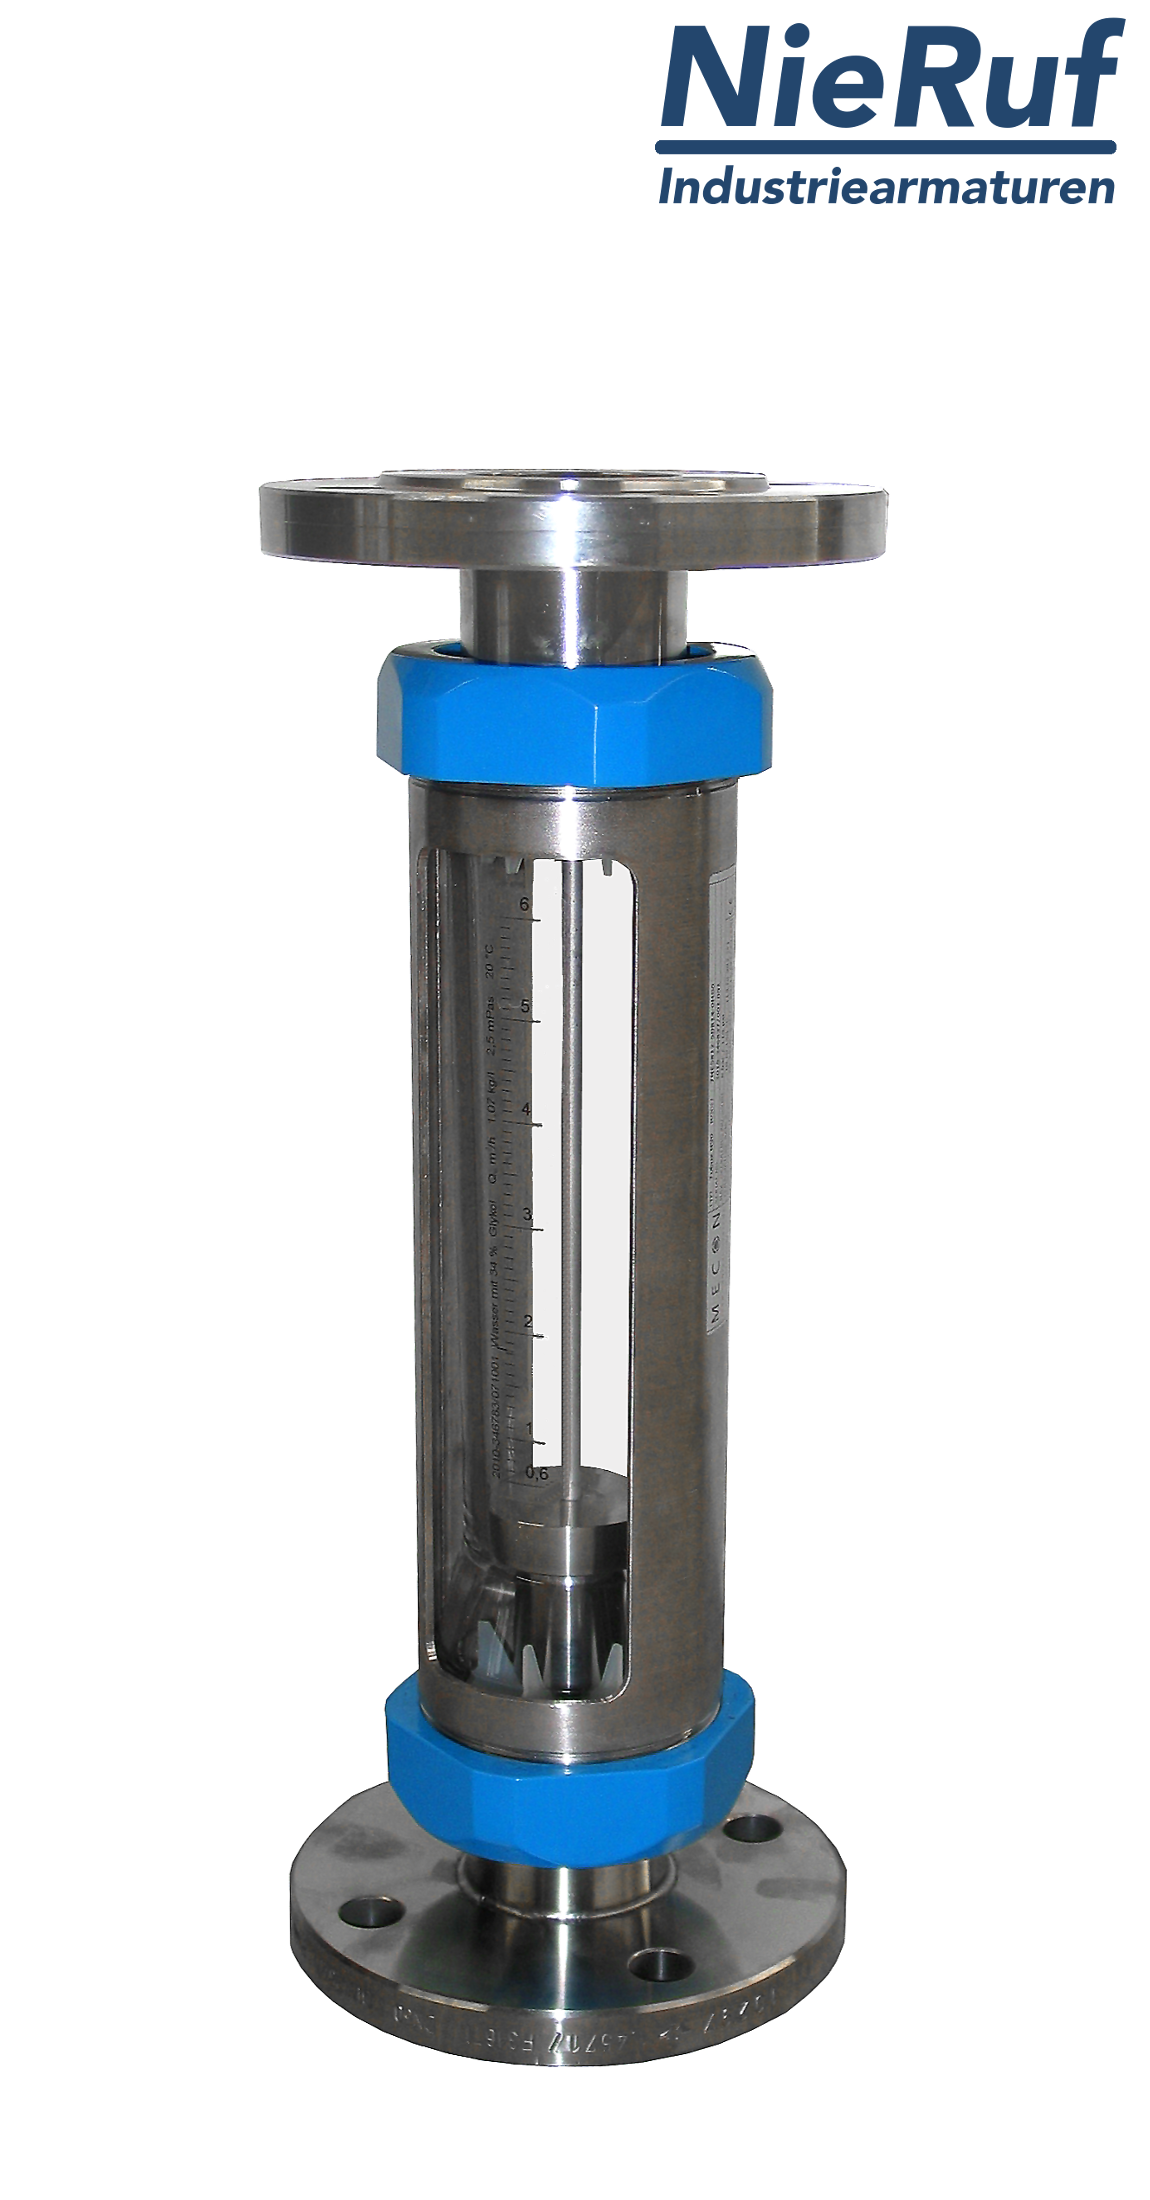 Variable area flowmeter stainless steel + borosilicate flange DN50 100.0 - 1000 l/h water FKM